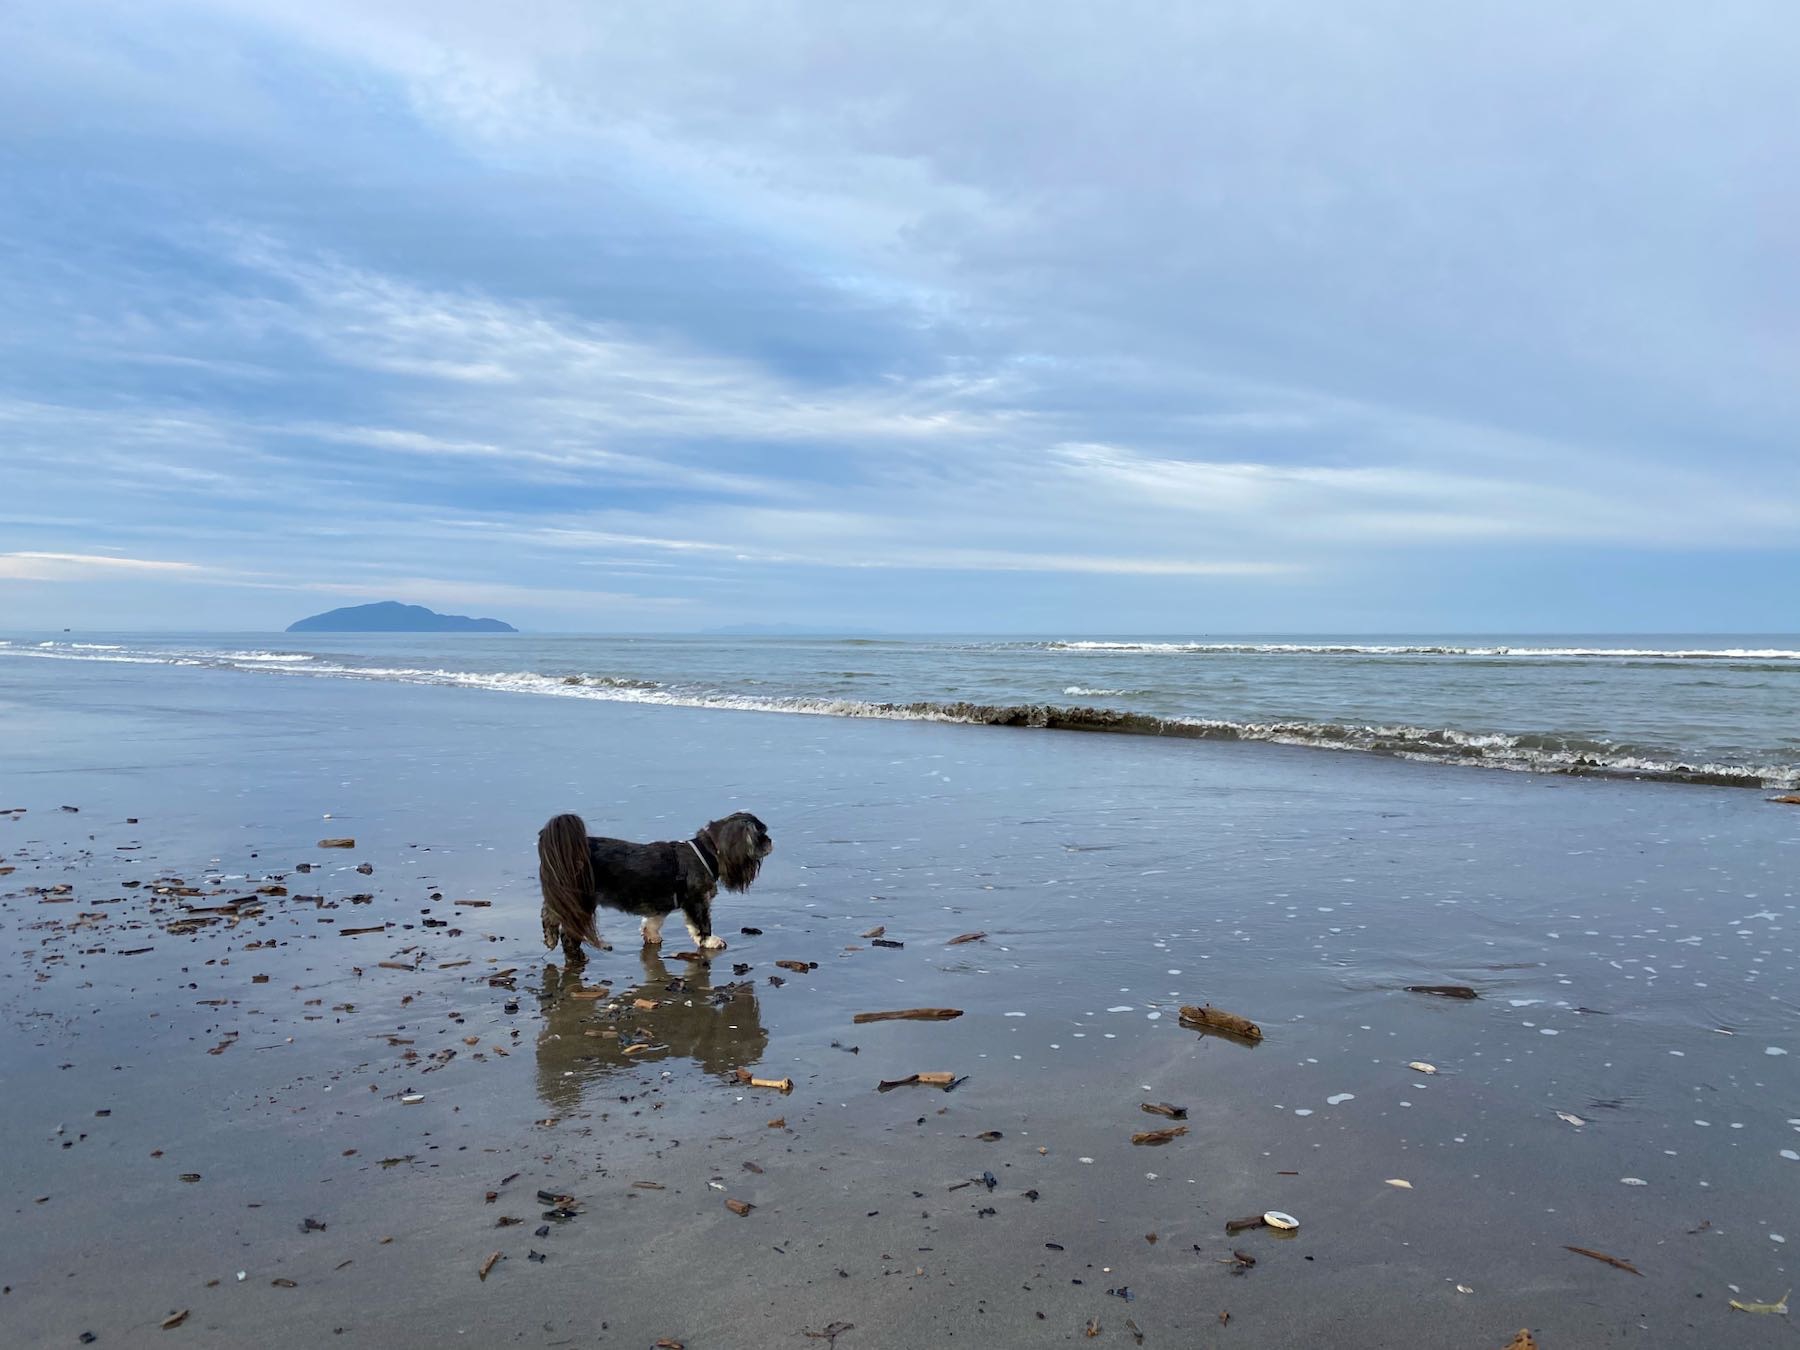 Small black dog reflected in the damp sand at the edge of the sea. 